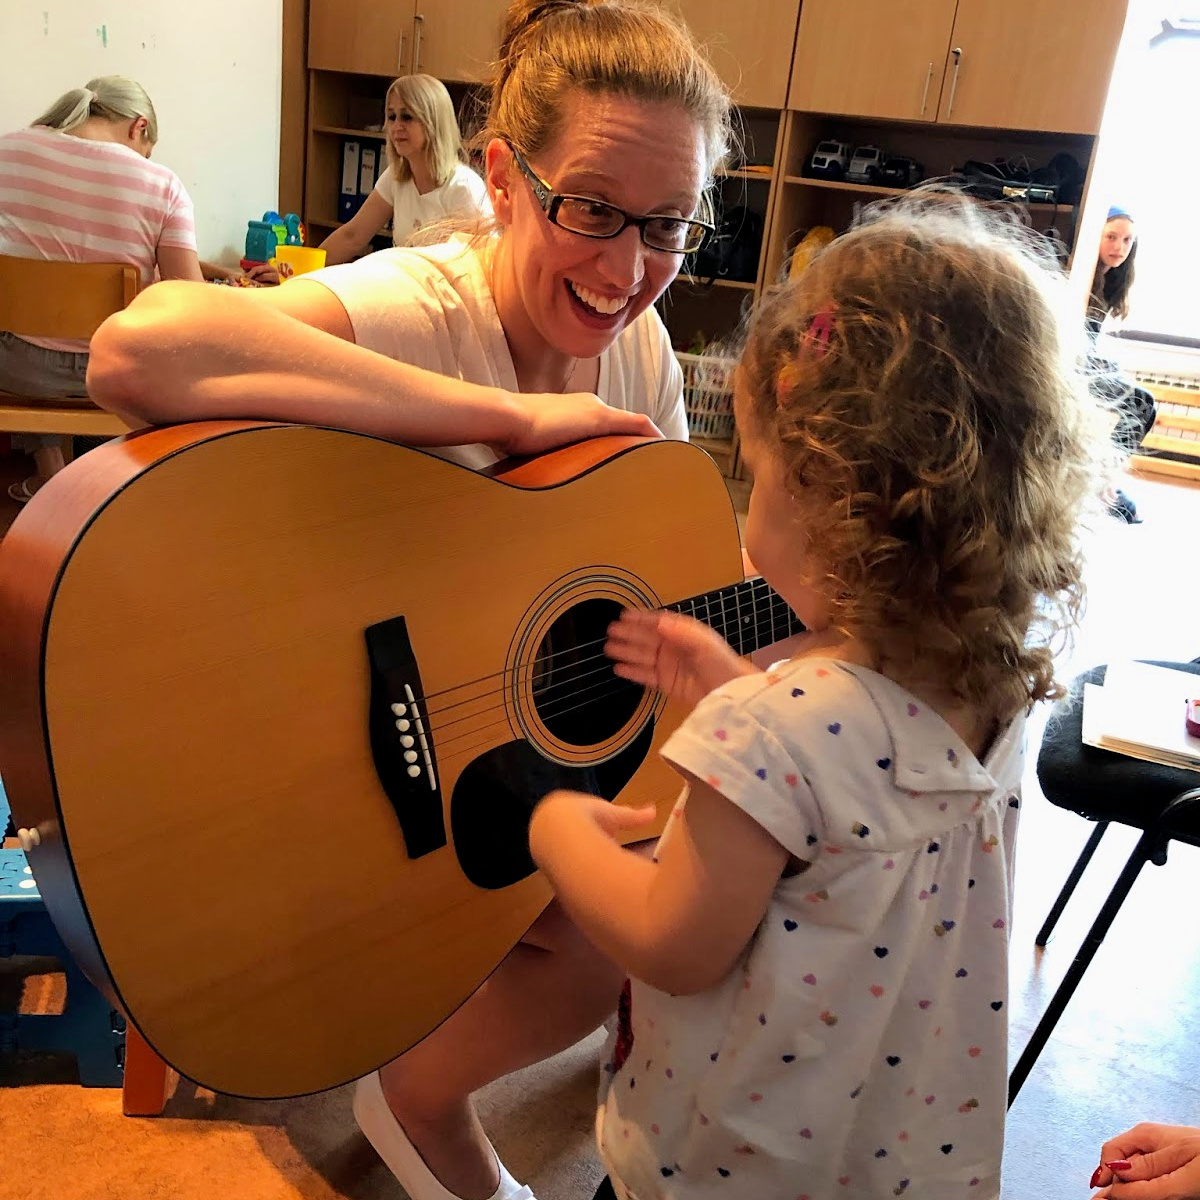 A young woman with a guitar smiles and invites a young girl to play and strum the strings.